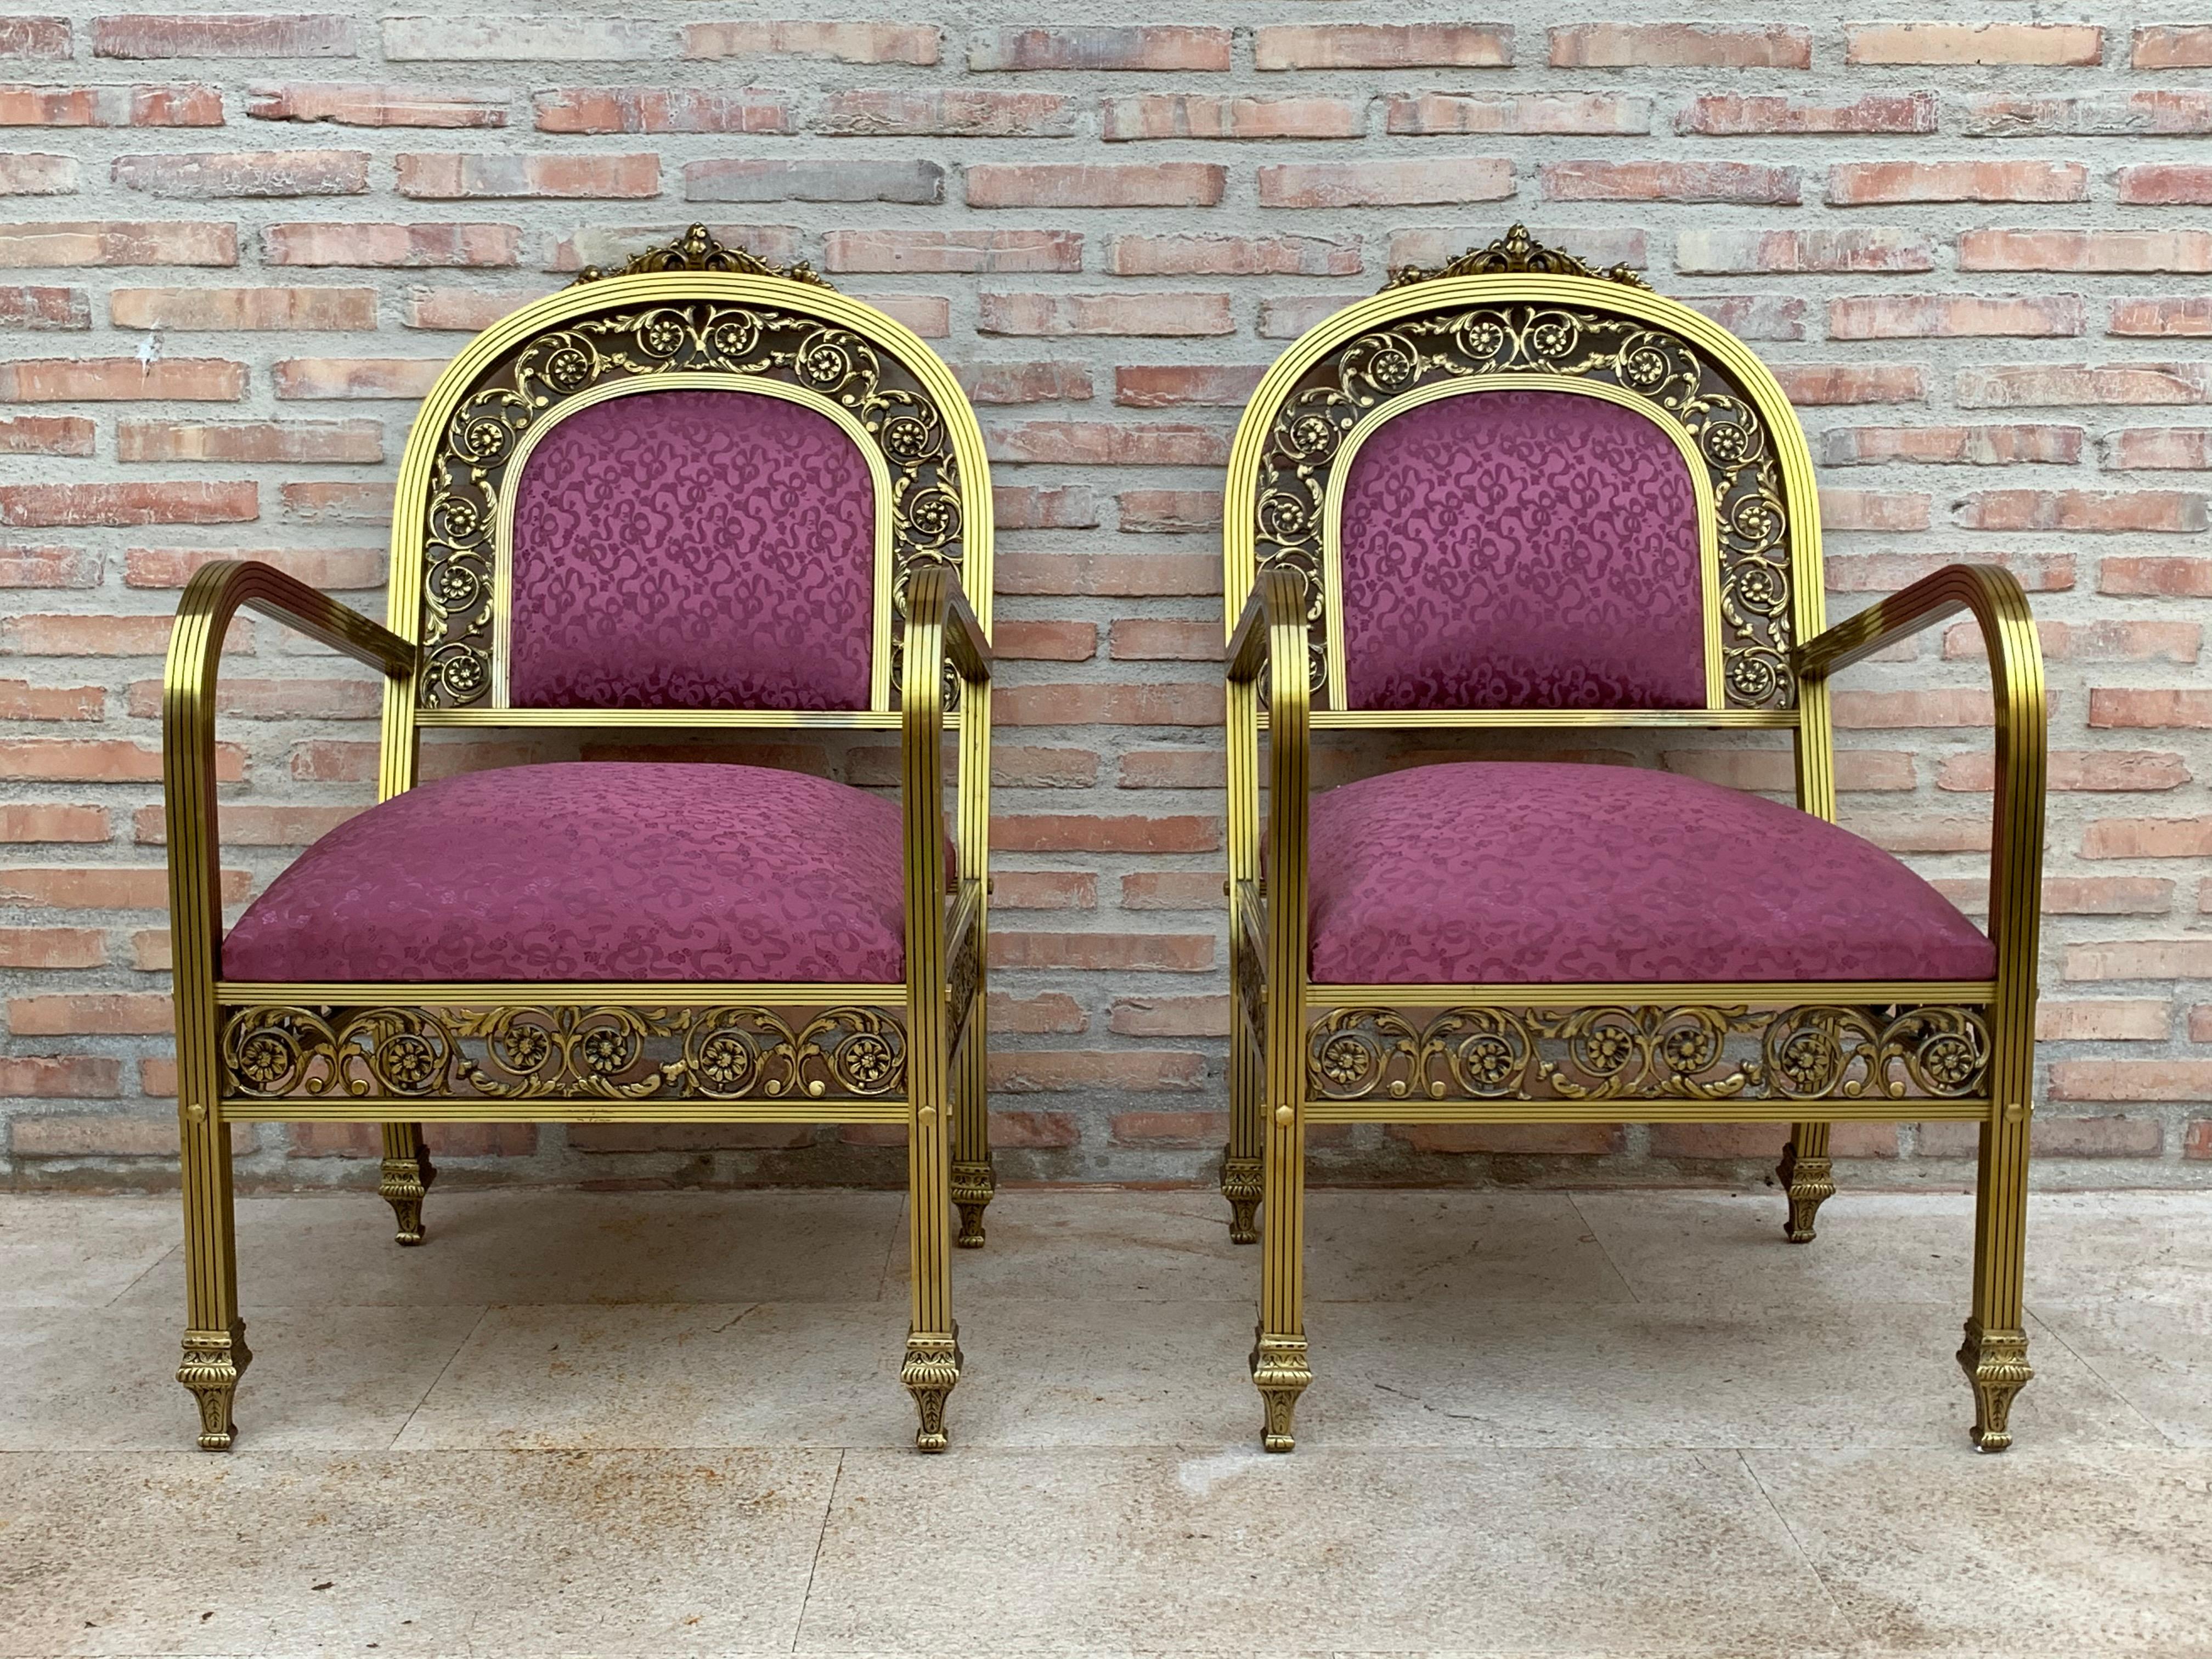 French pair of midcentury gold brass and bronze chairs with red upholstery
Very comfortable chairs with seat and back reupholstered.